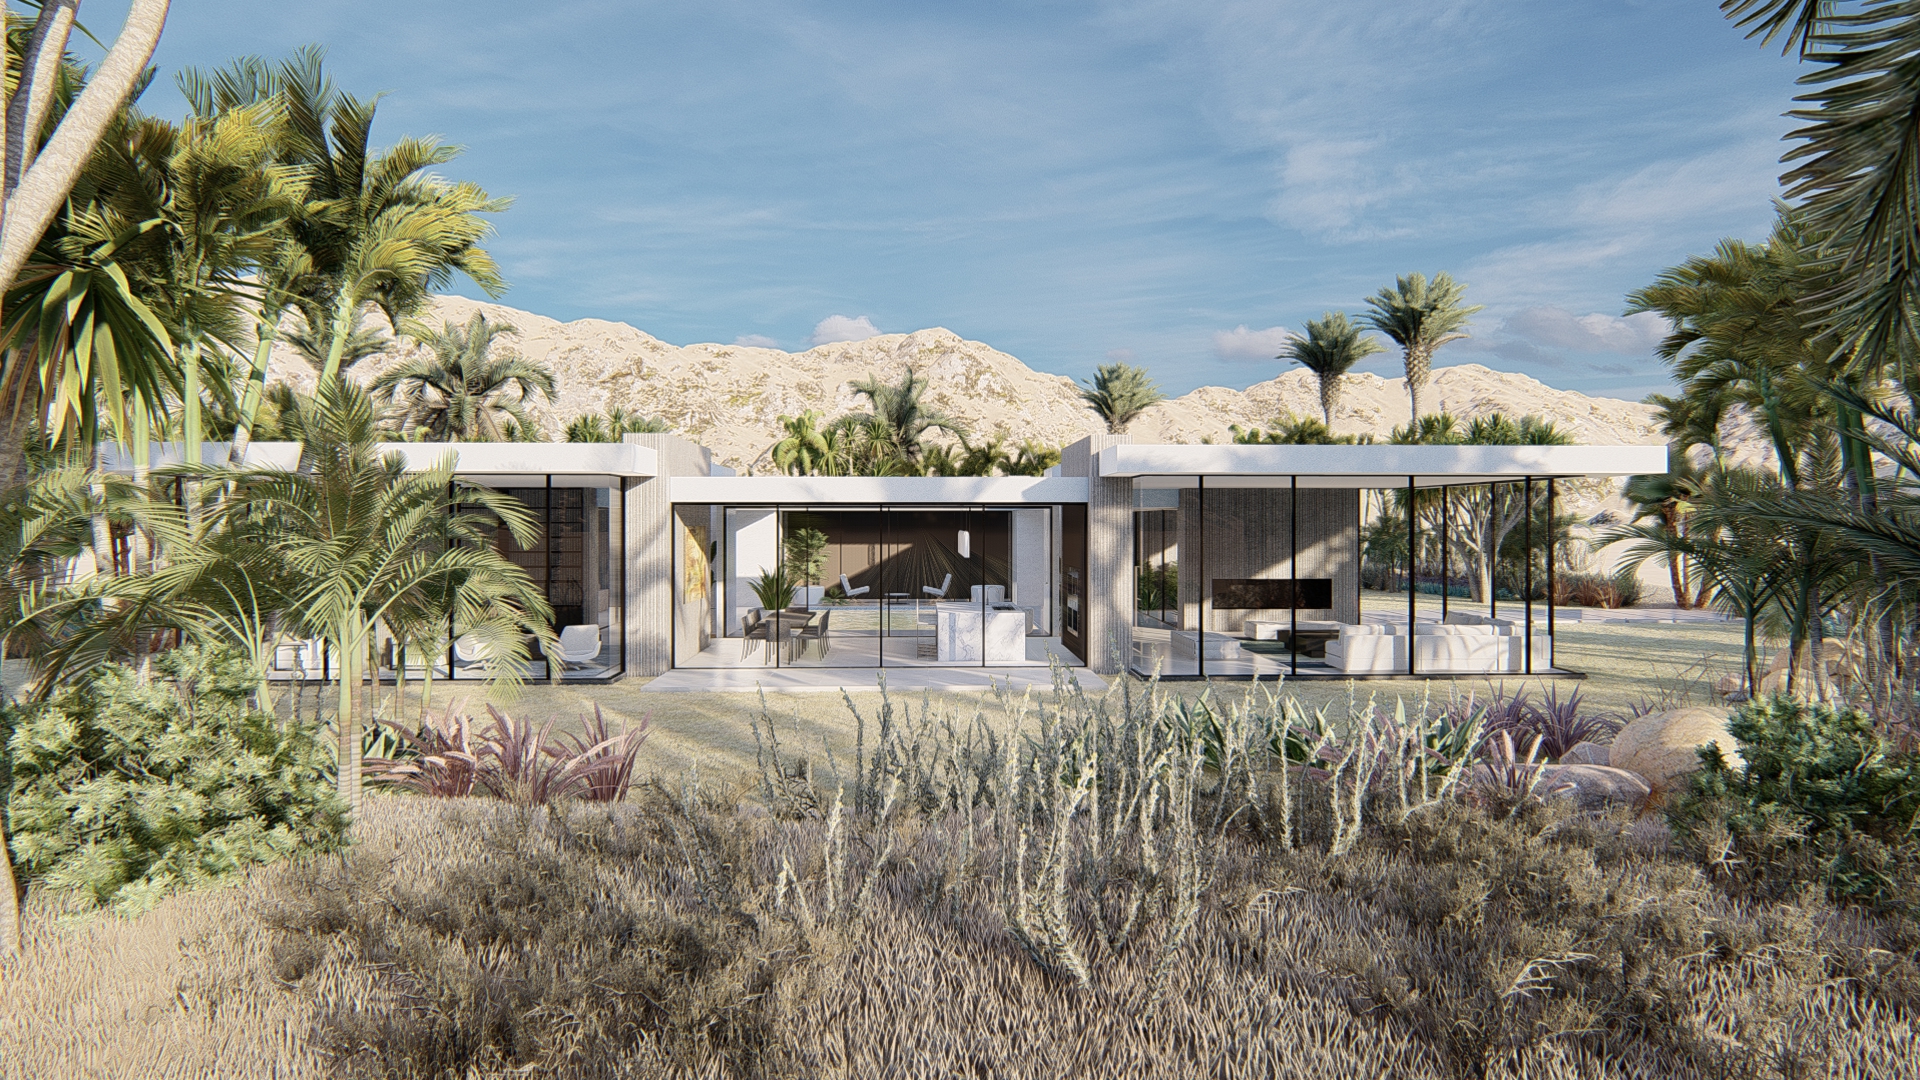 Paolo-Volpis-Architect-california-arizona-nevada-desert-house-modern-white-minimalist-wood-slats-teak-glass-concrete-water-feature-roof-garden-flat-roof-metal-steel-structure-with (16).jpg